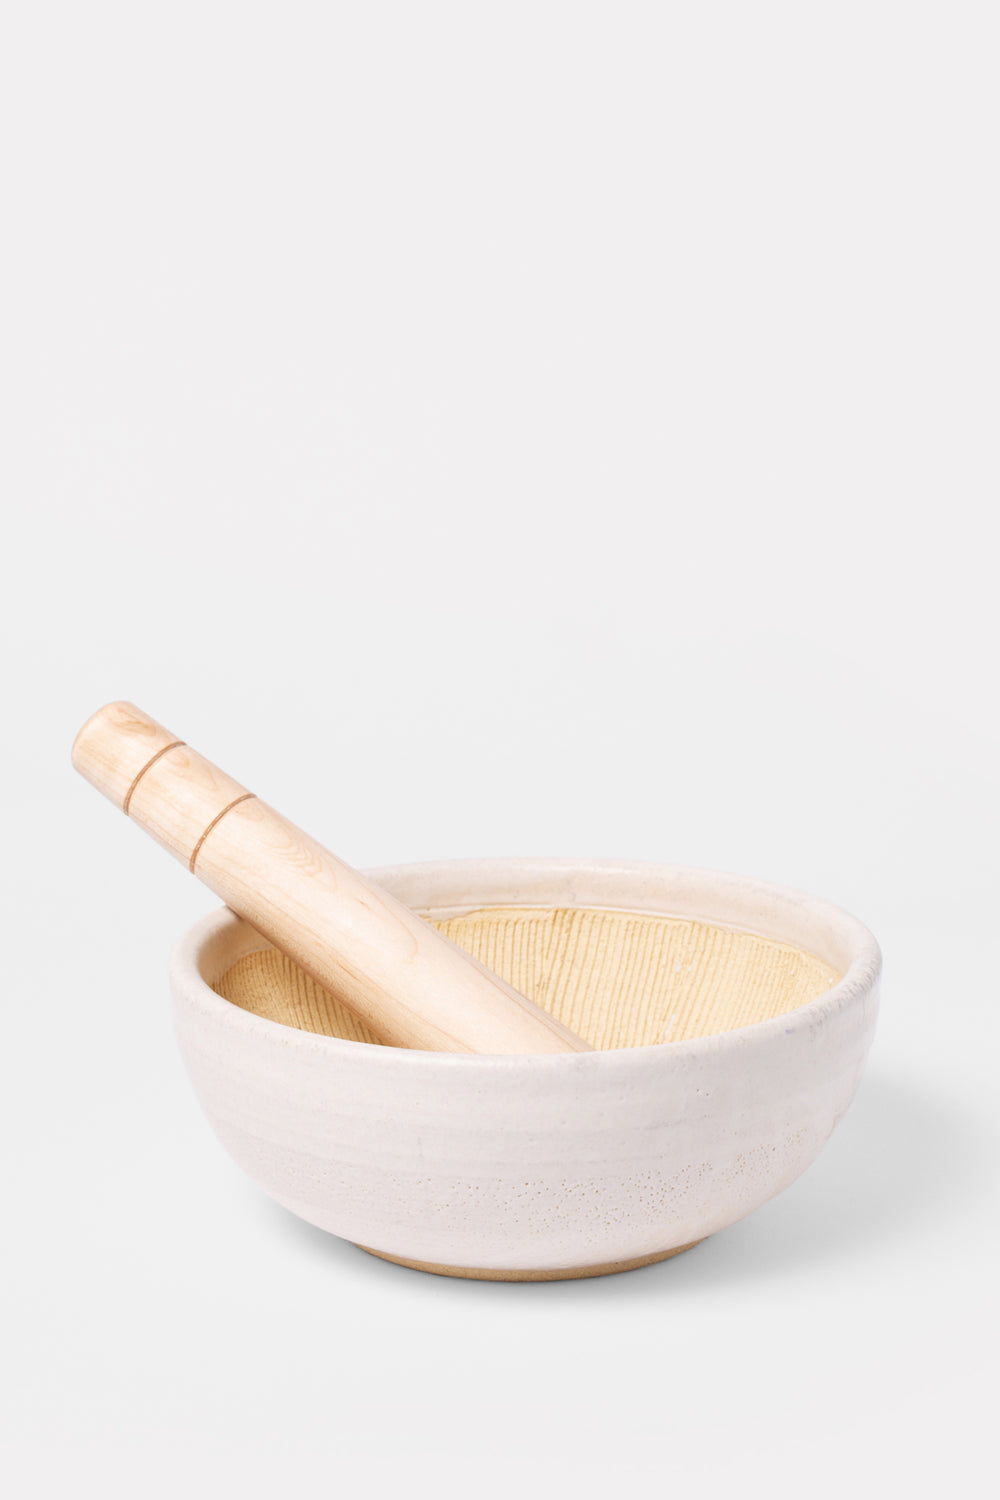 ALICE'S MORTAR AND PESTLE – Permanent Collection